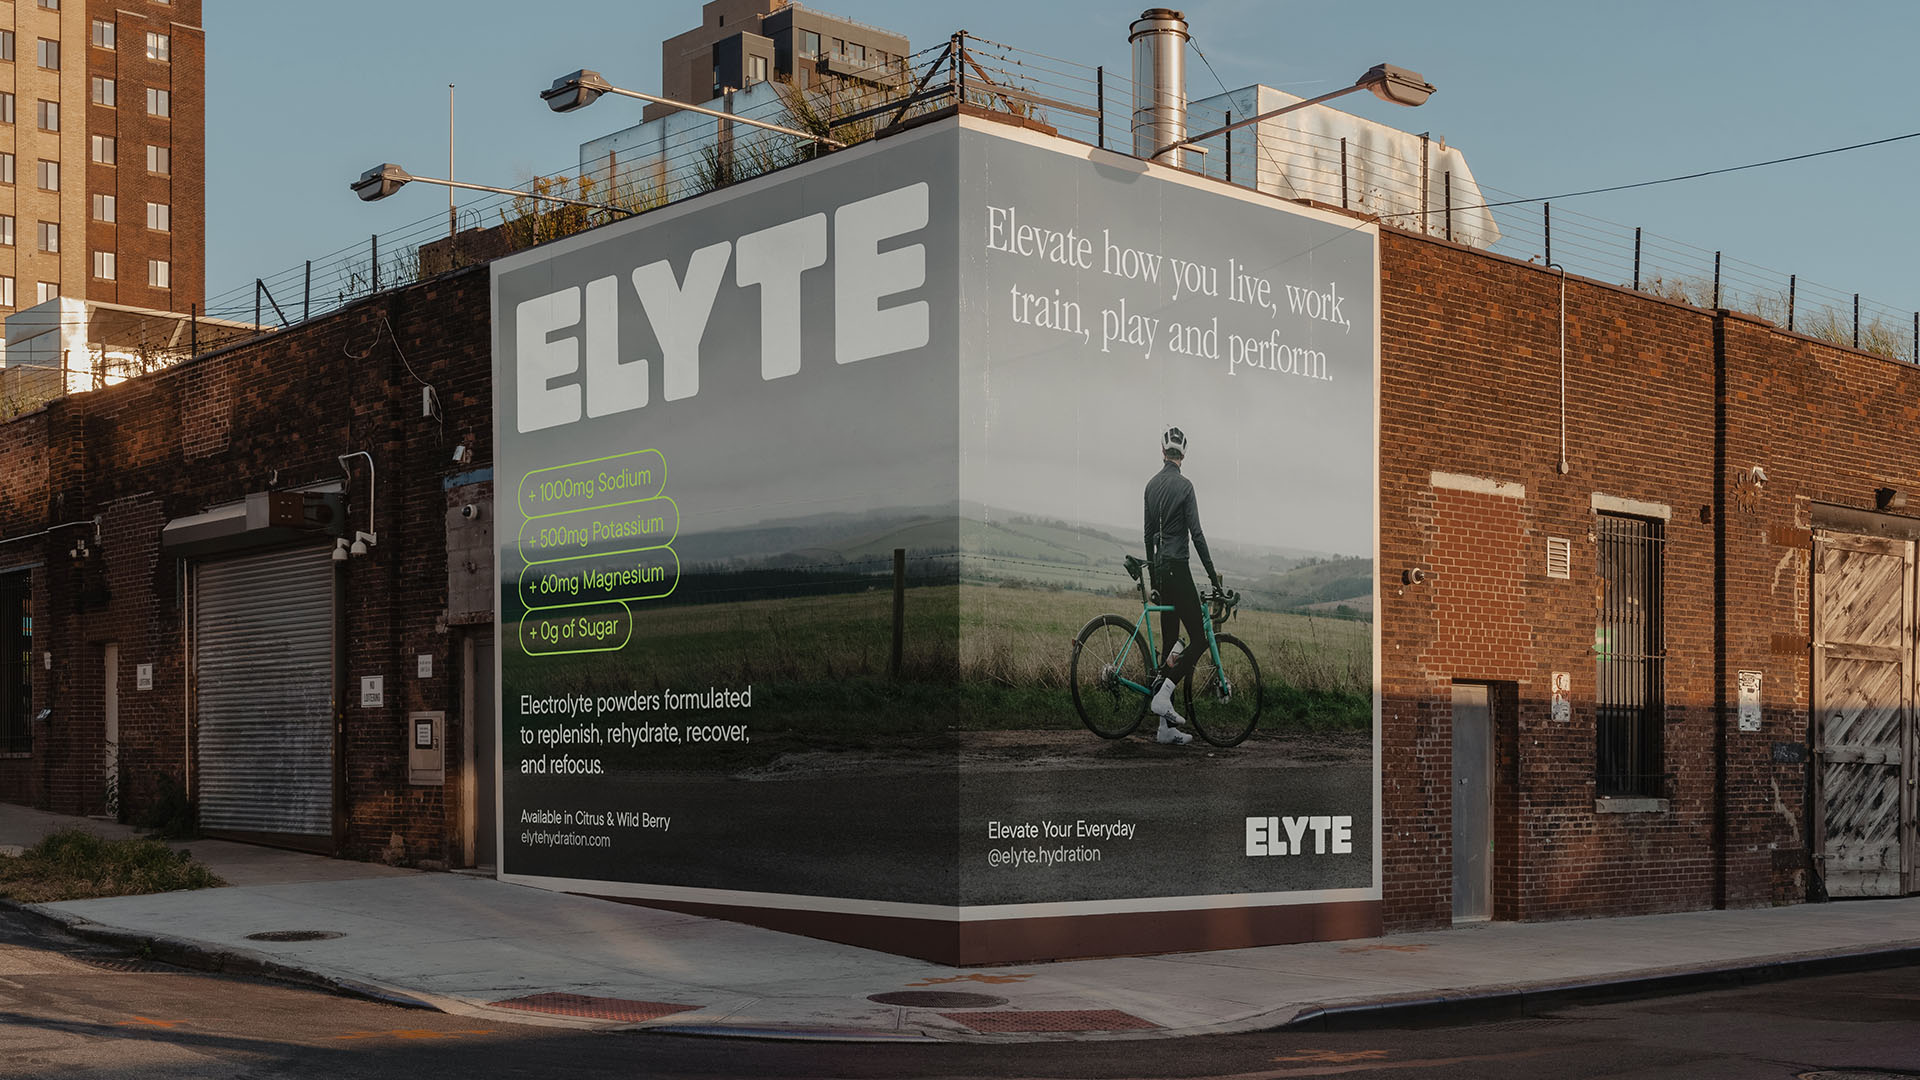 Branded Elyte billboard with a man on a bike and messaging about hydration and Elyte benefits.